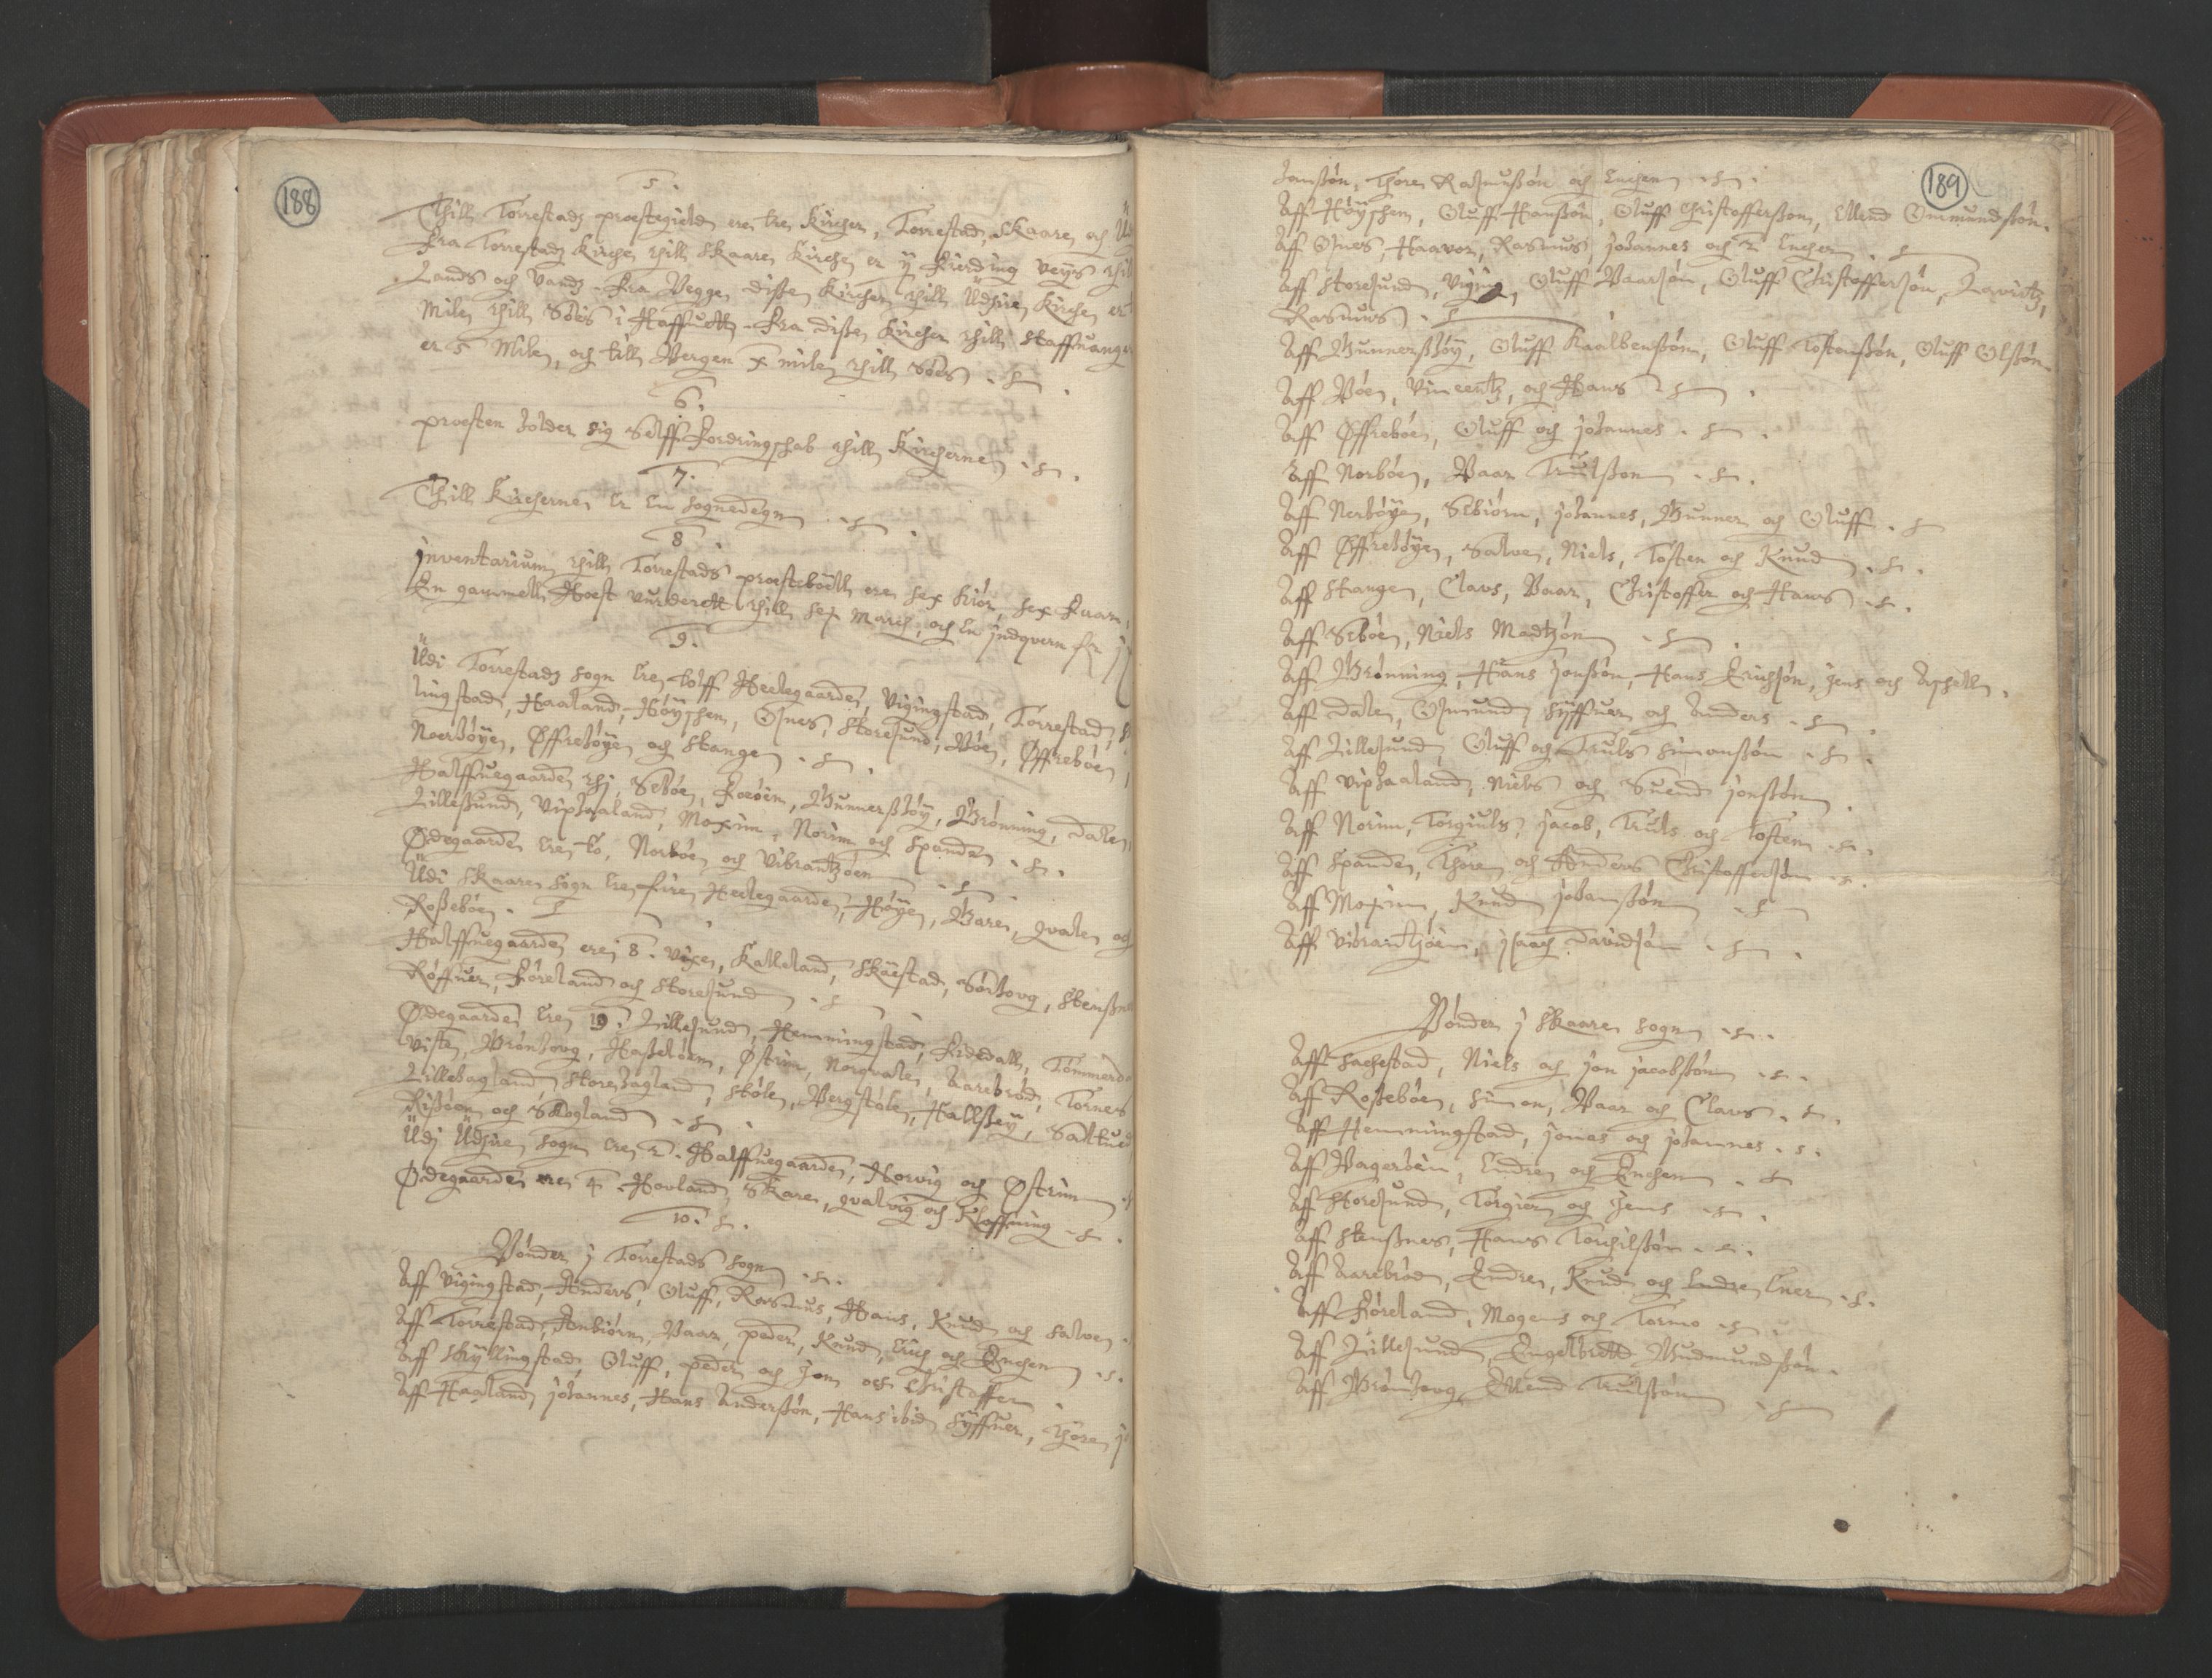 RA, Vicar's Census 1664-1666, no. 18: Stavanger deanery and Karmsund deanery, 1664-1666, p. 188-189